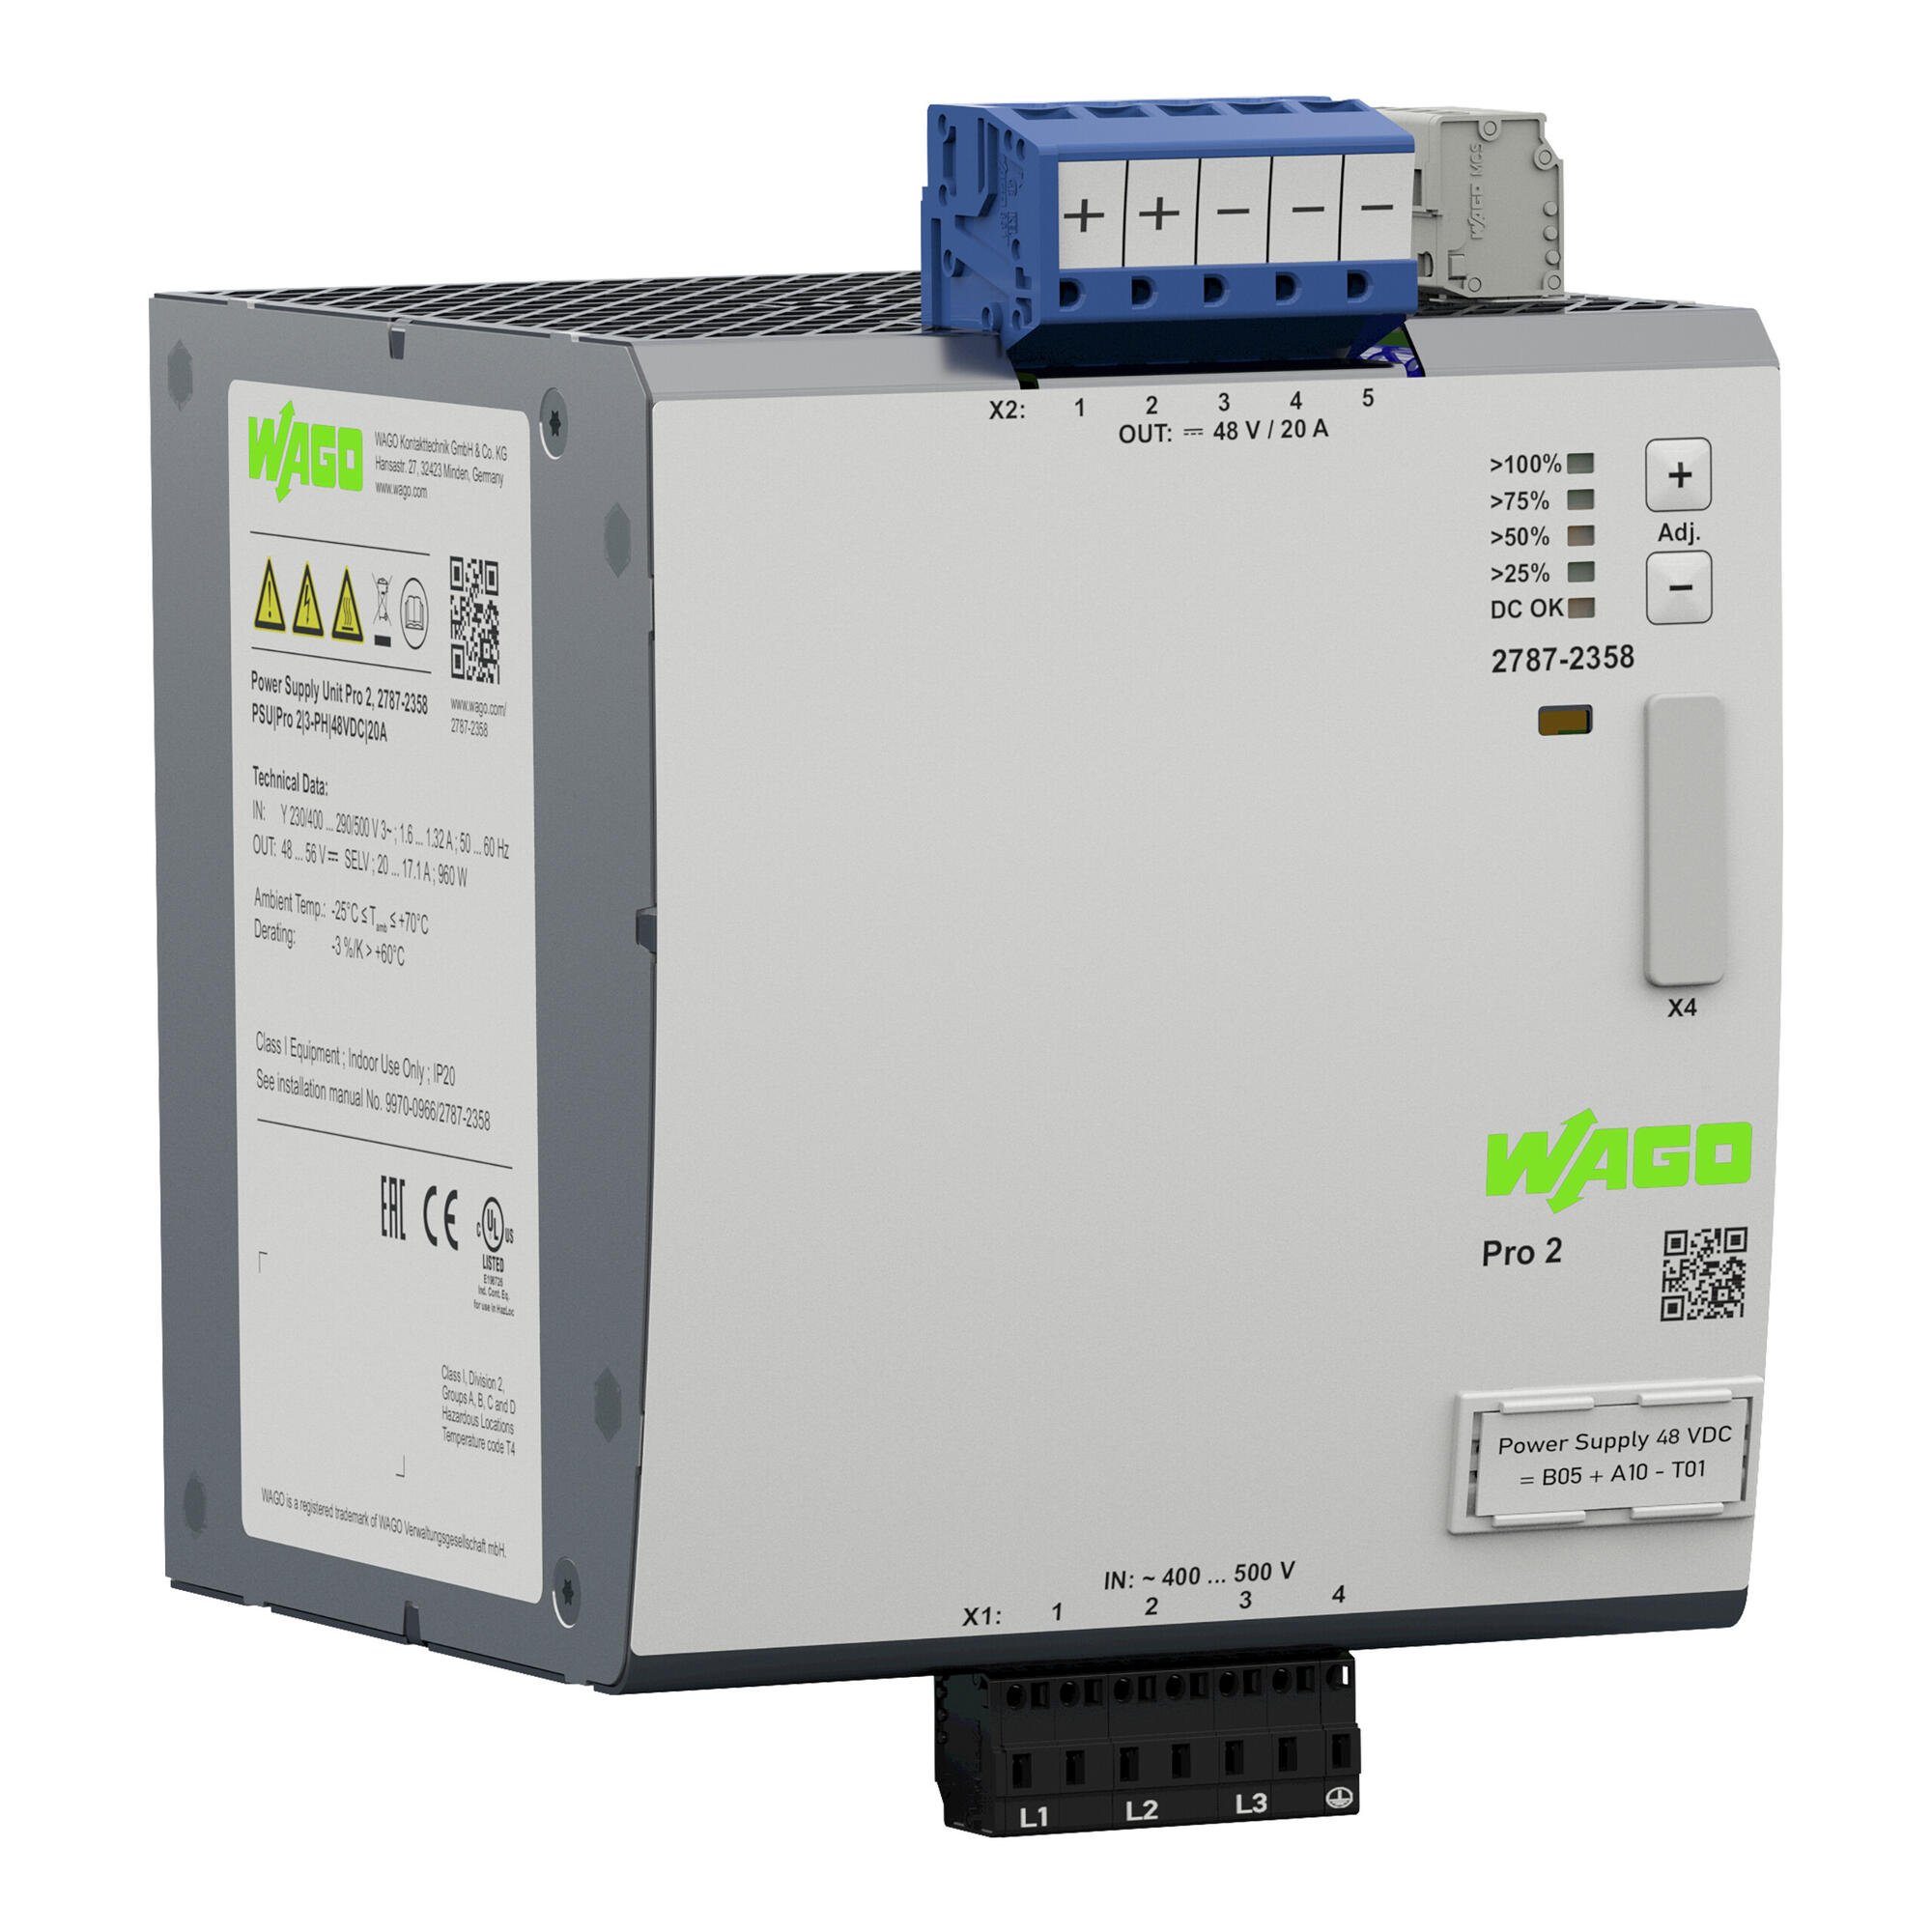 Power supply; Pro 2; 3-phase; 48 VDC output voltage; 20 A output current; TopBoost + PowerBoost; communication capability